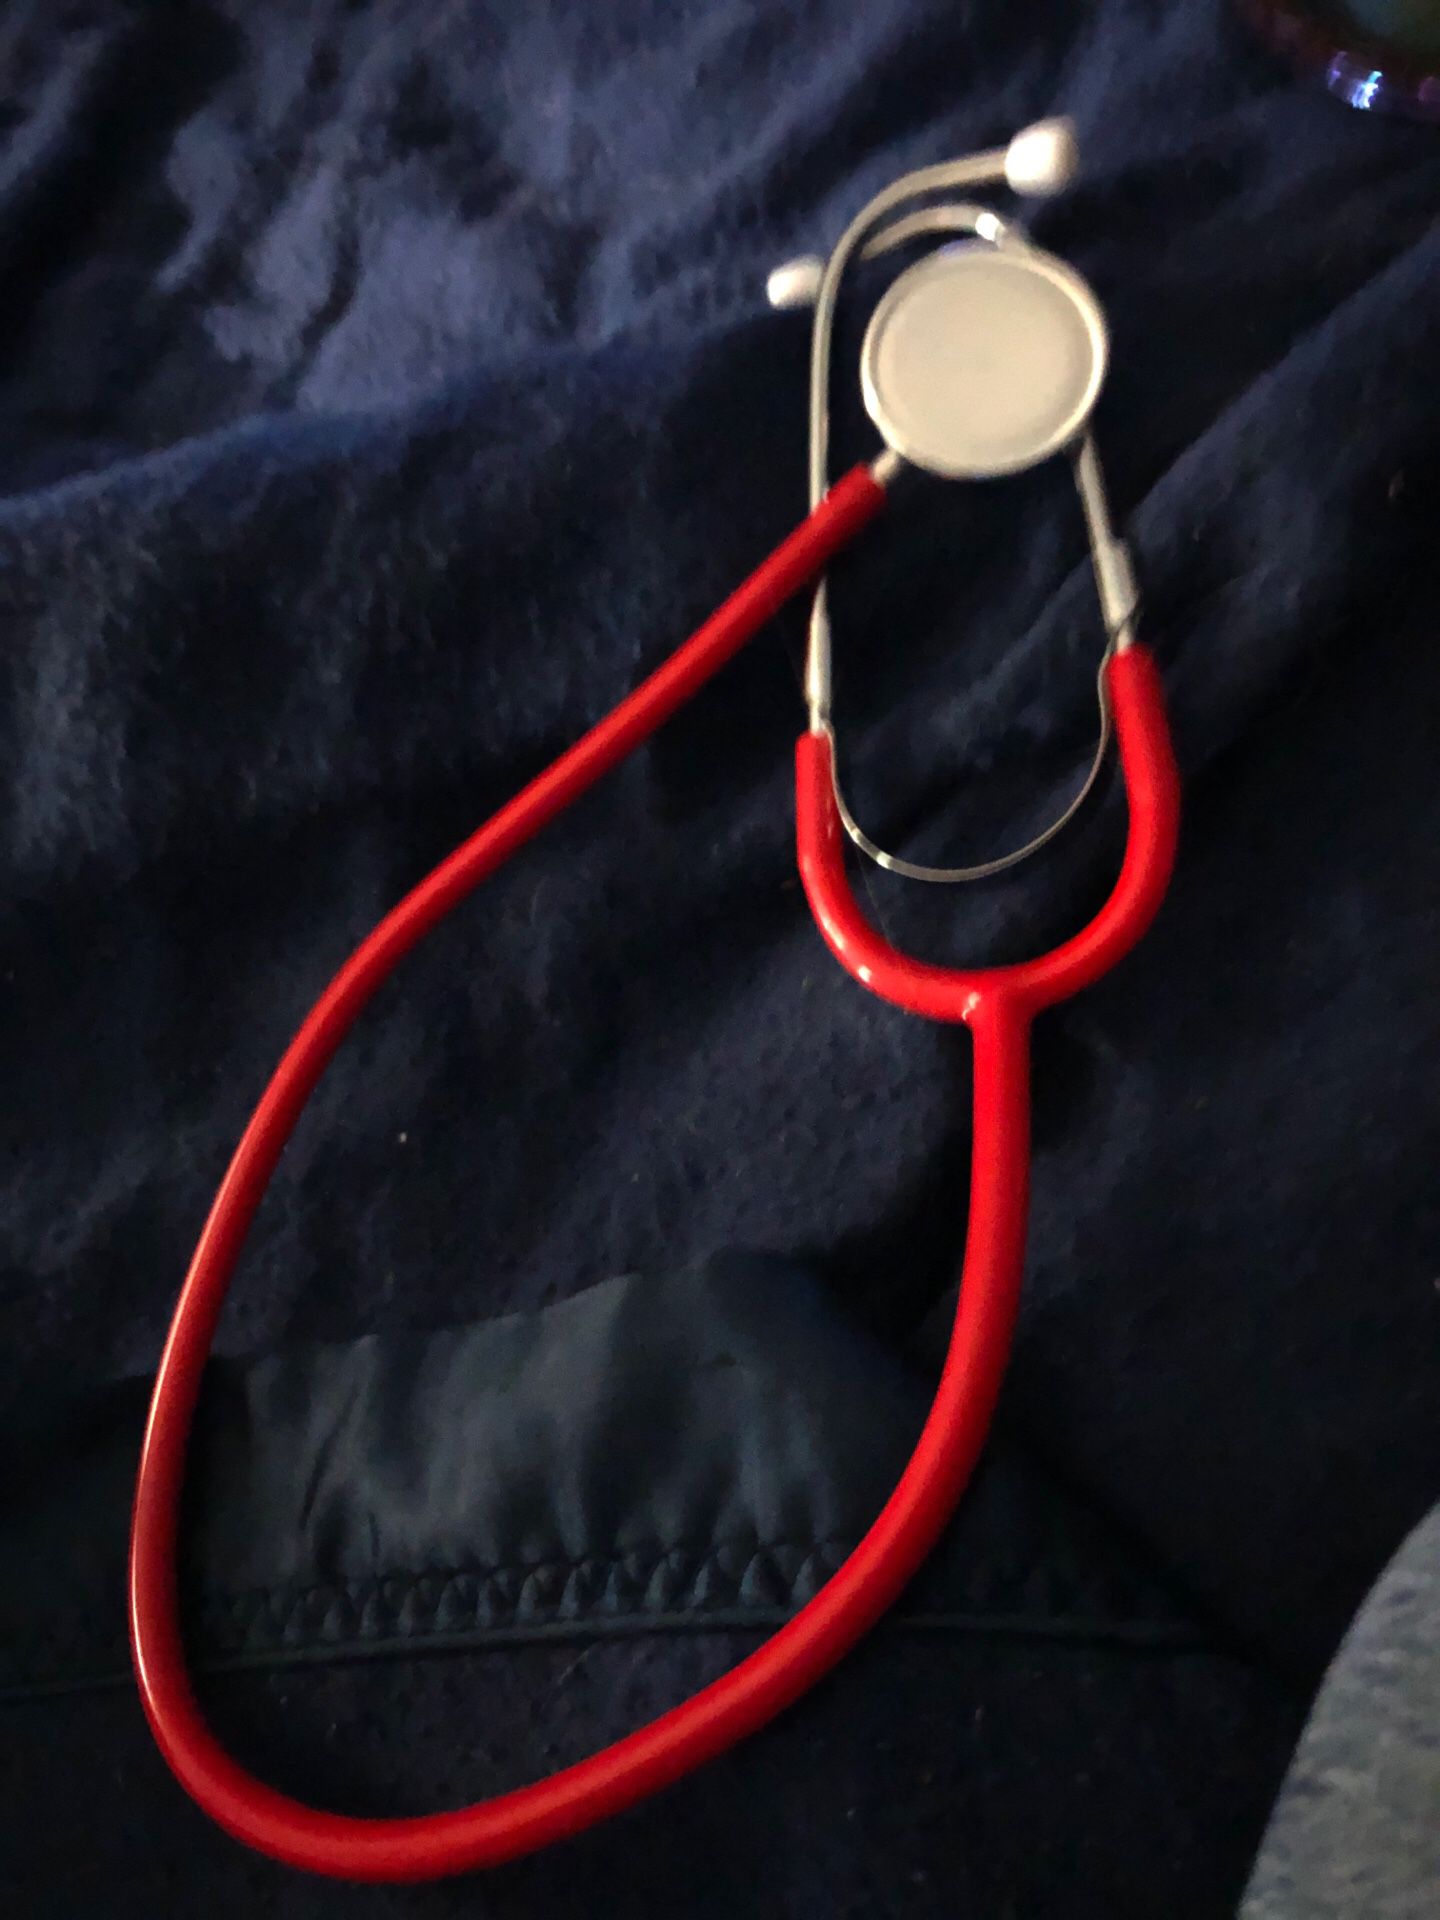 Stethoscope works great get this brand new